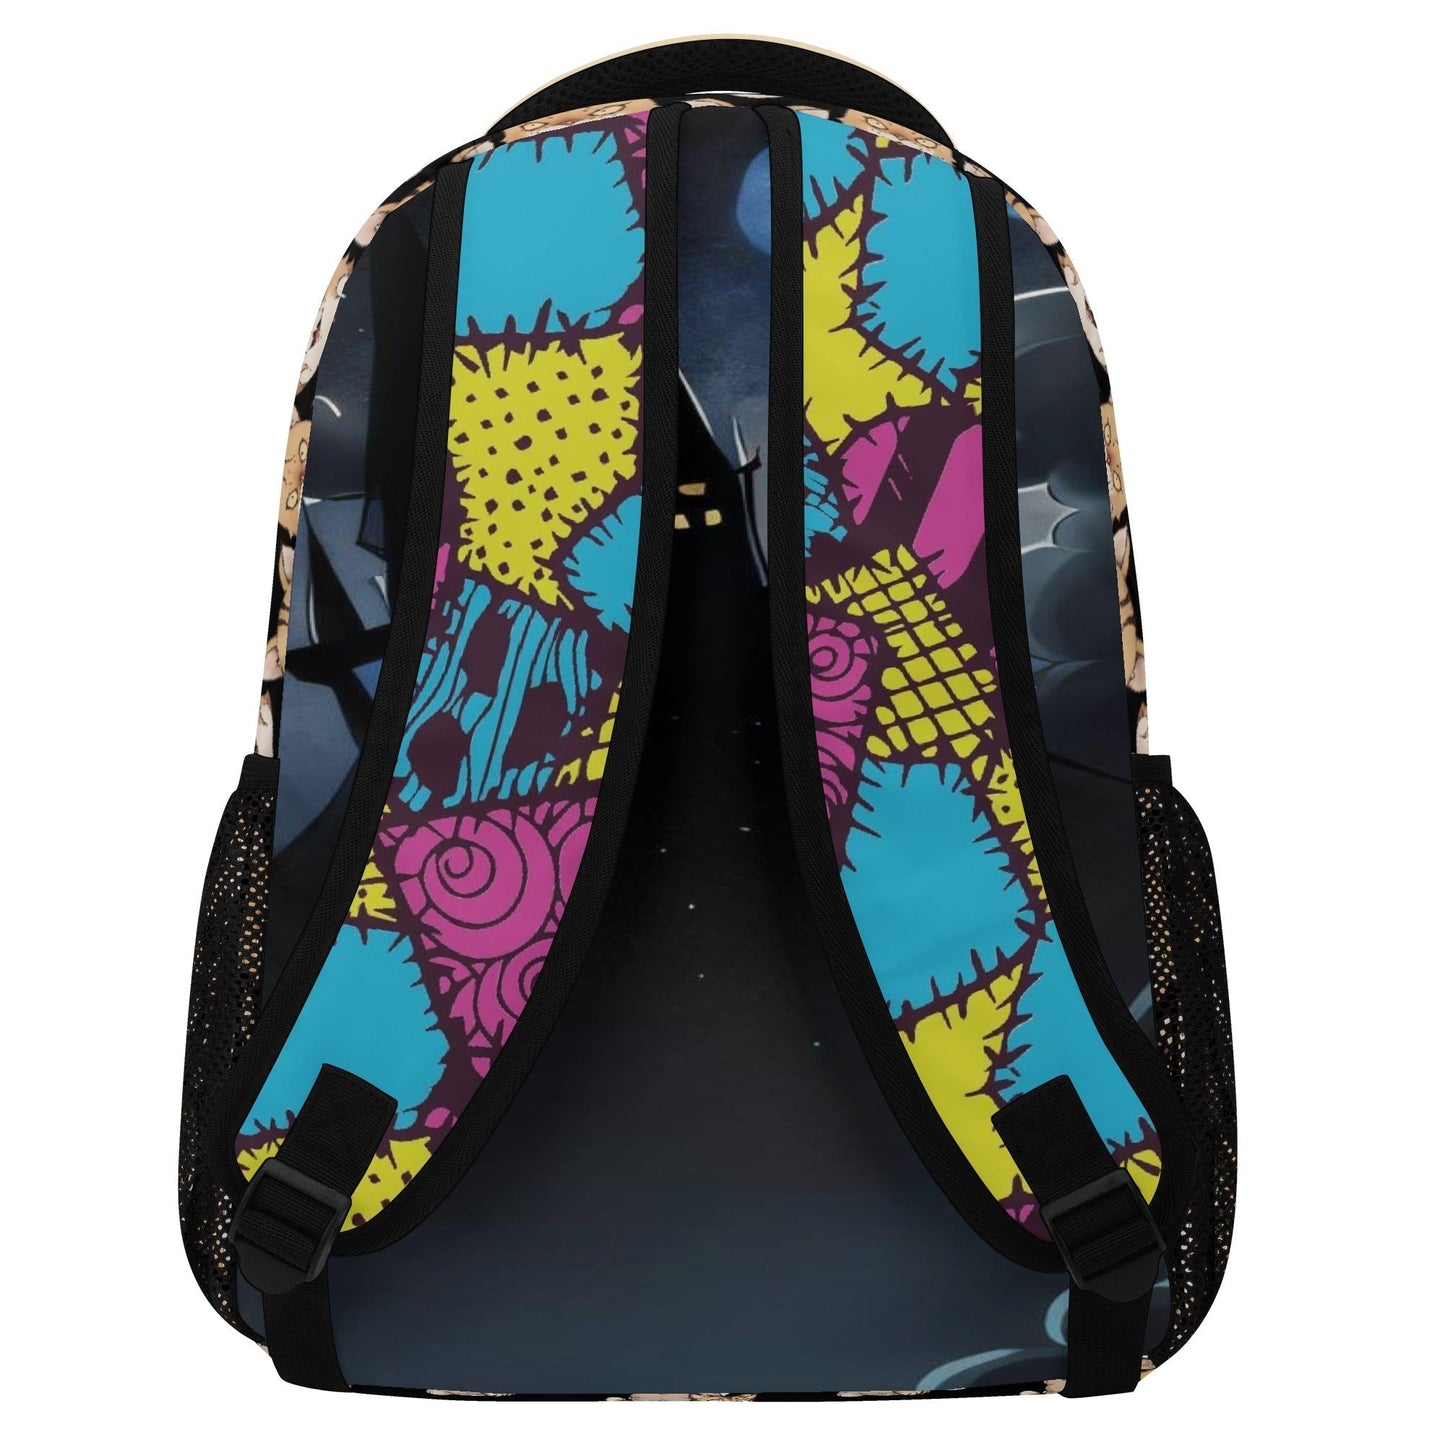 Stand out  with the  Nightmare Before Hey Nugget Casual Style School Bakcpack  available at Hey Nugget. Grab yours today!